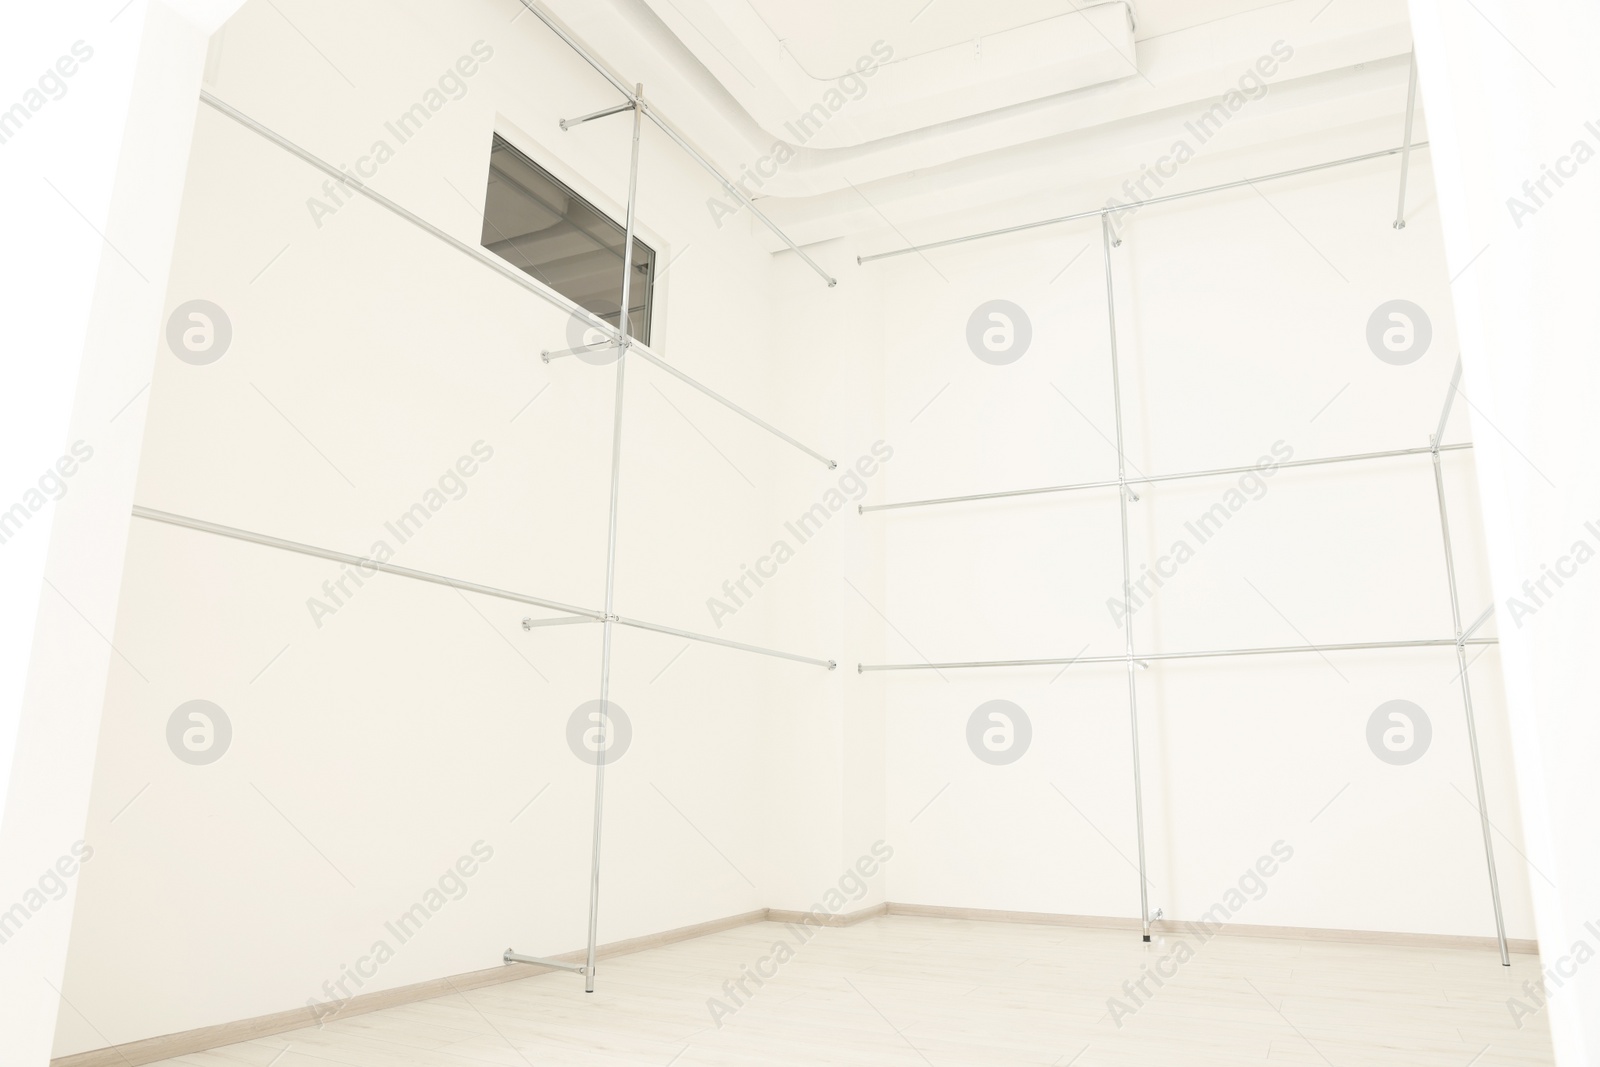 Photo of Metal pipes near white walls in empty office room. Interior design